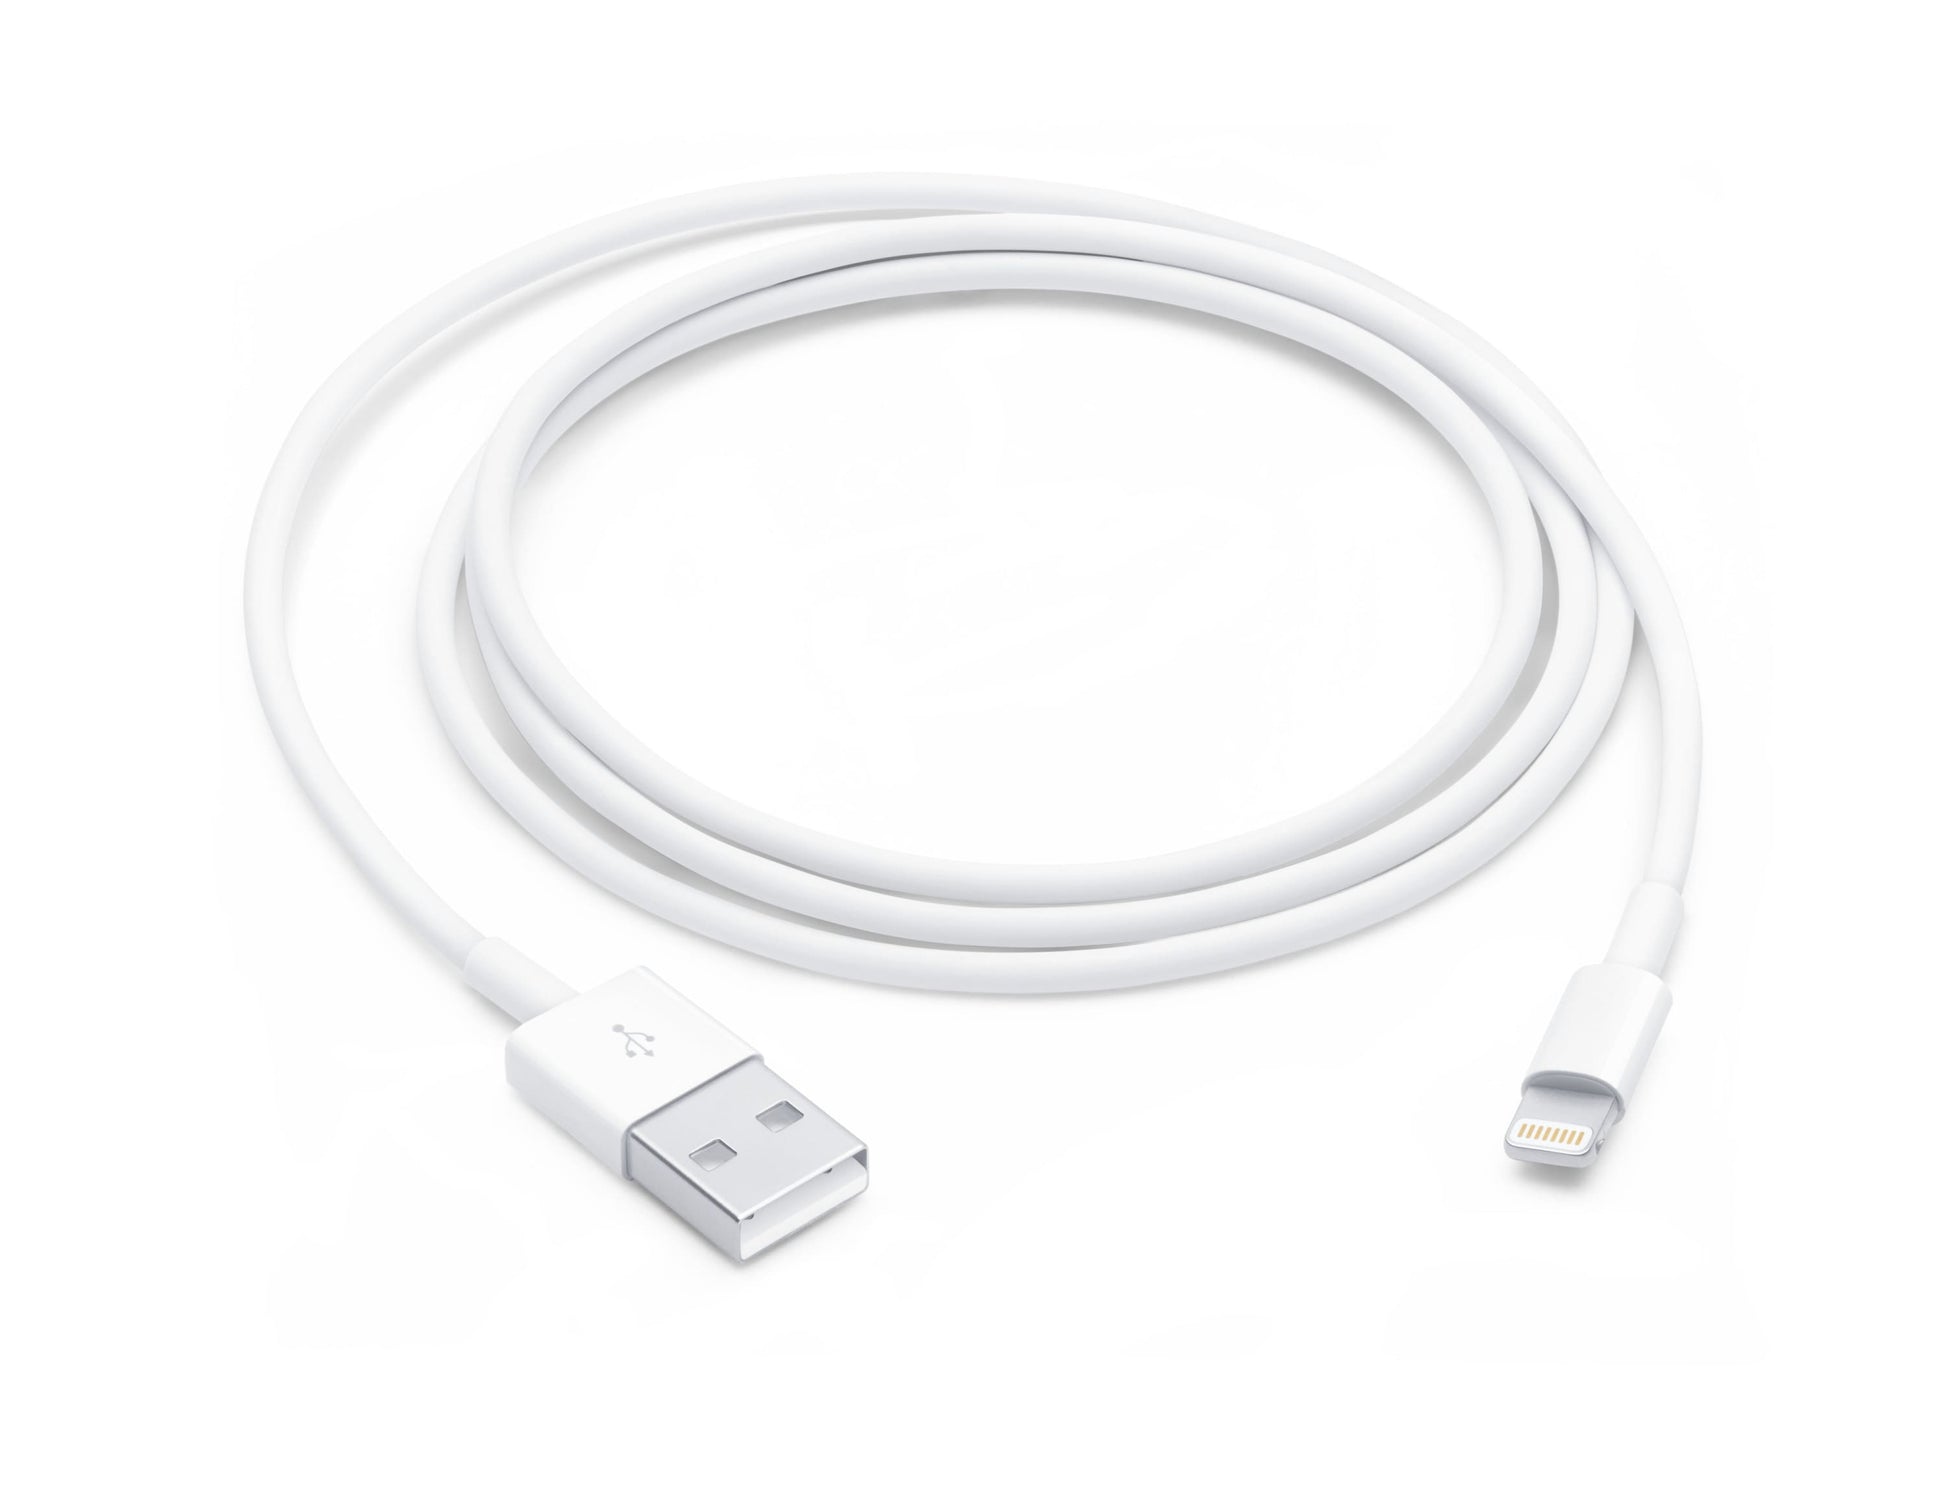 Gerlax USB Lightning Cable for Apple 1M Data Sync Charger for iPhone iPad White Fatio General Trading